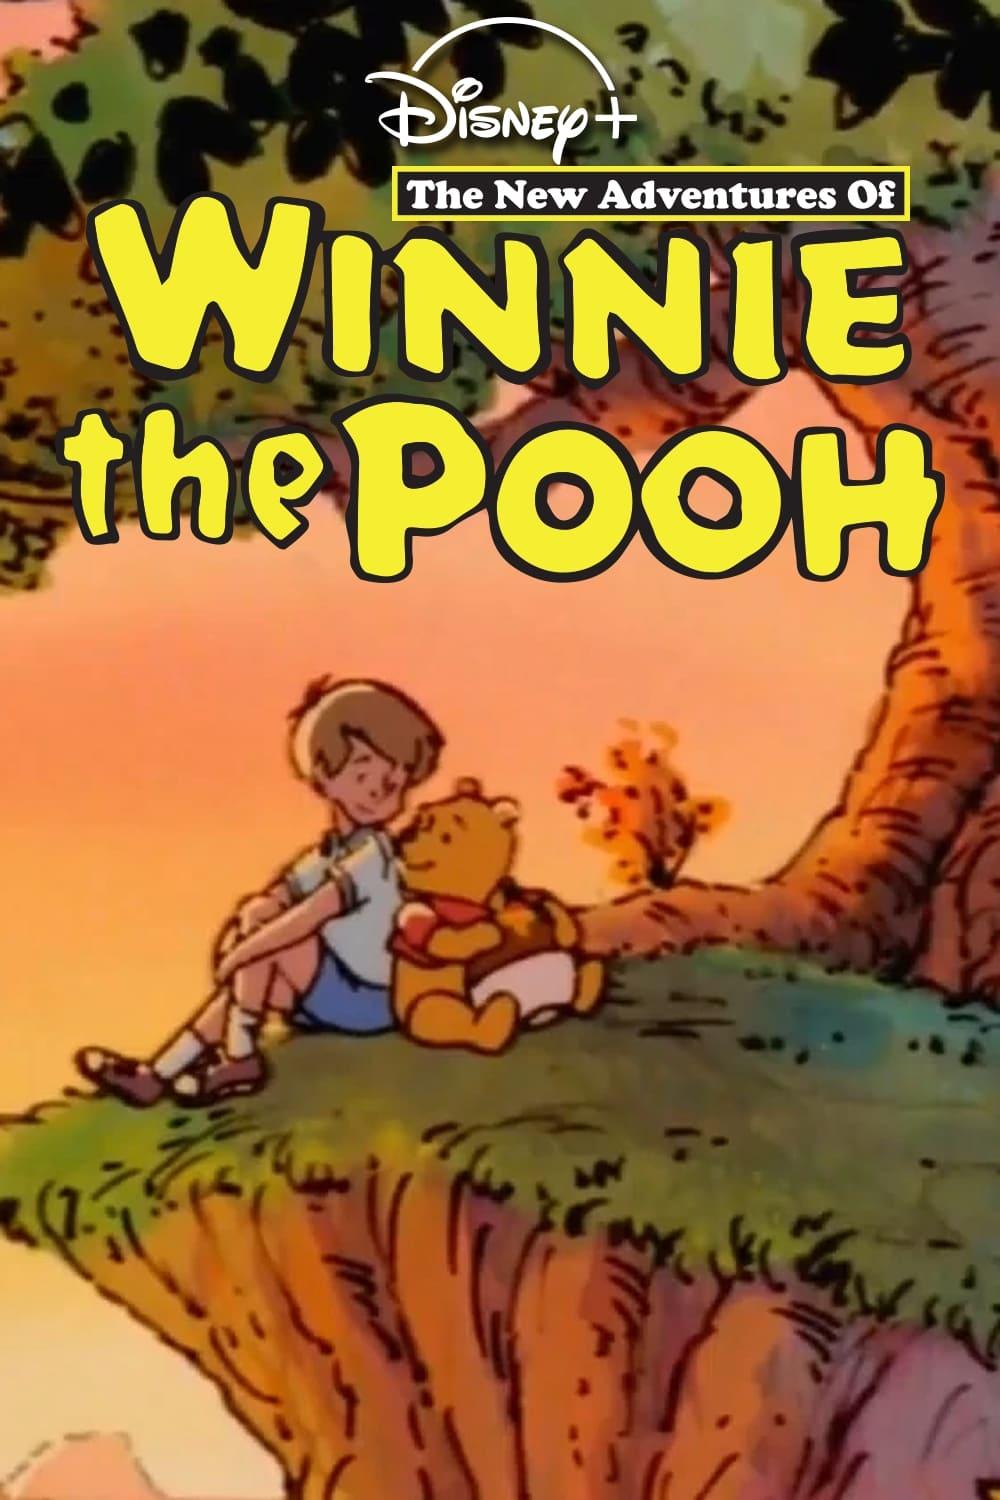 The New Adventures of Winnie the Pooh poster